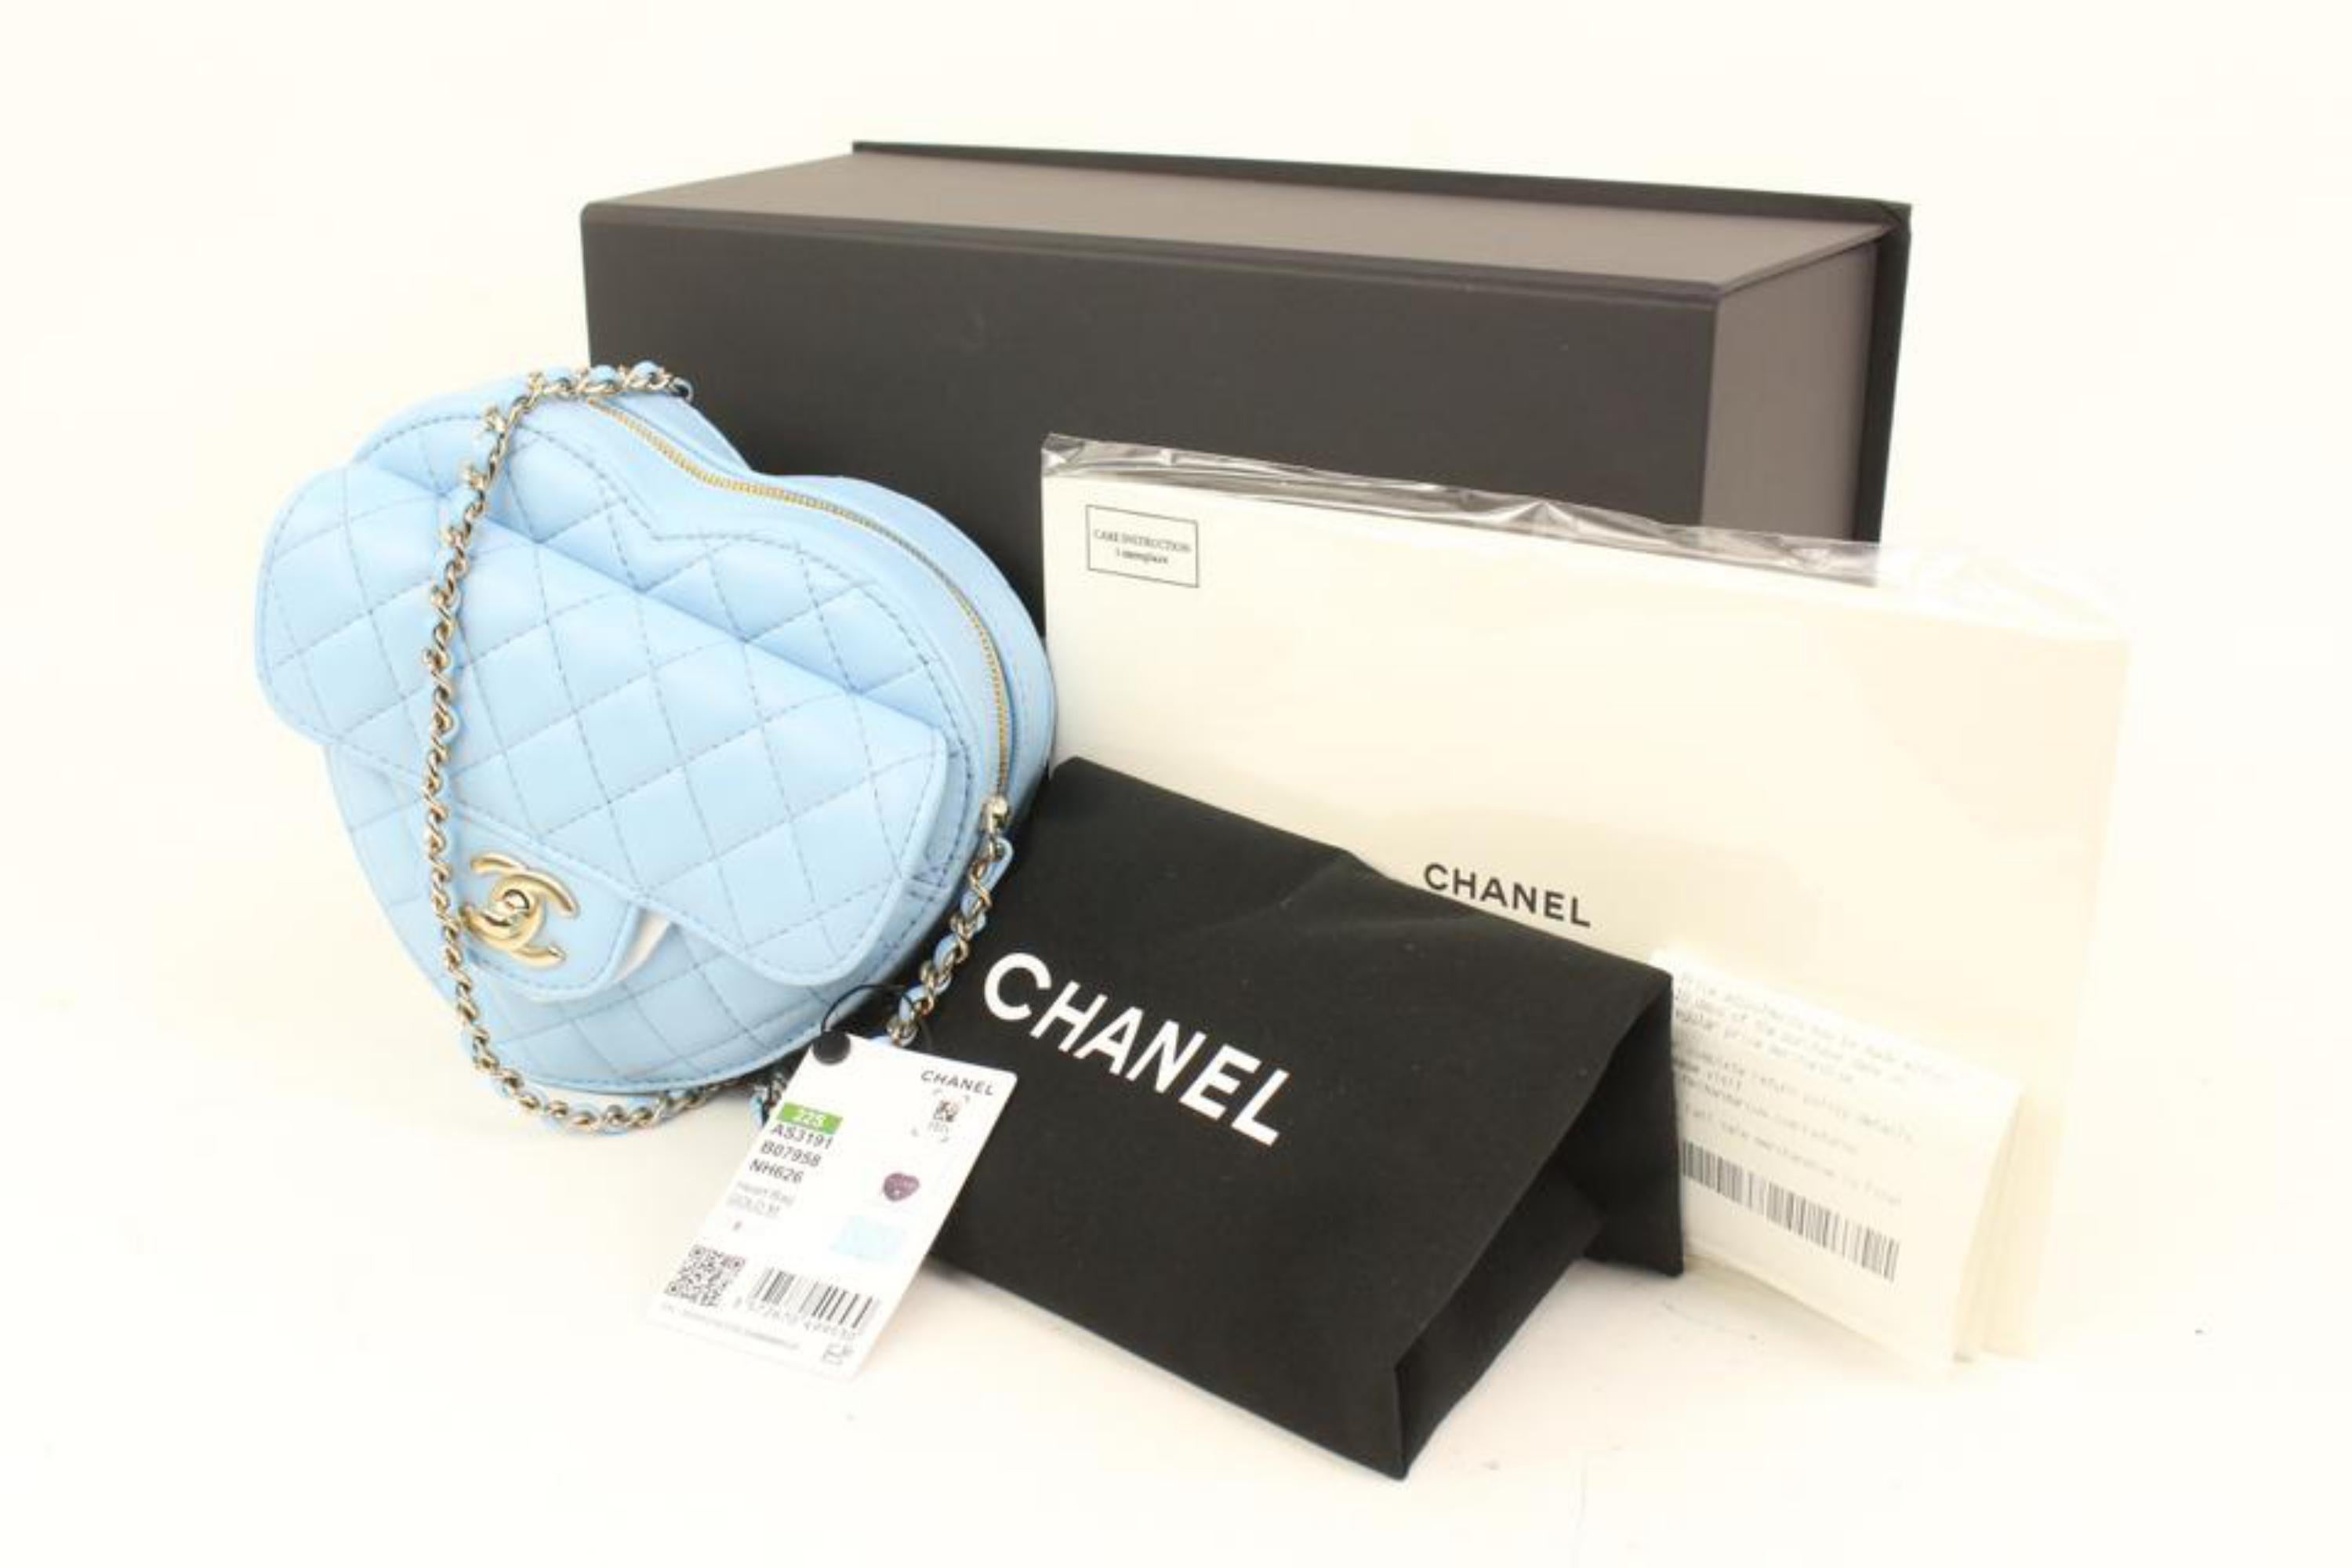 Chanel 22s Blue Quilted Lambskin CC in Love Large Heart Bag GHW 10cz426s
Date Code/Serial Number: KNHLPN6A
Made In: France
Measurements: Length:  7